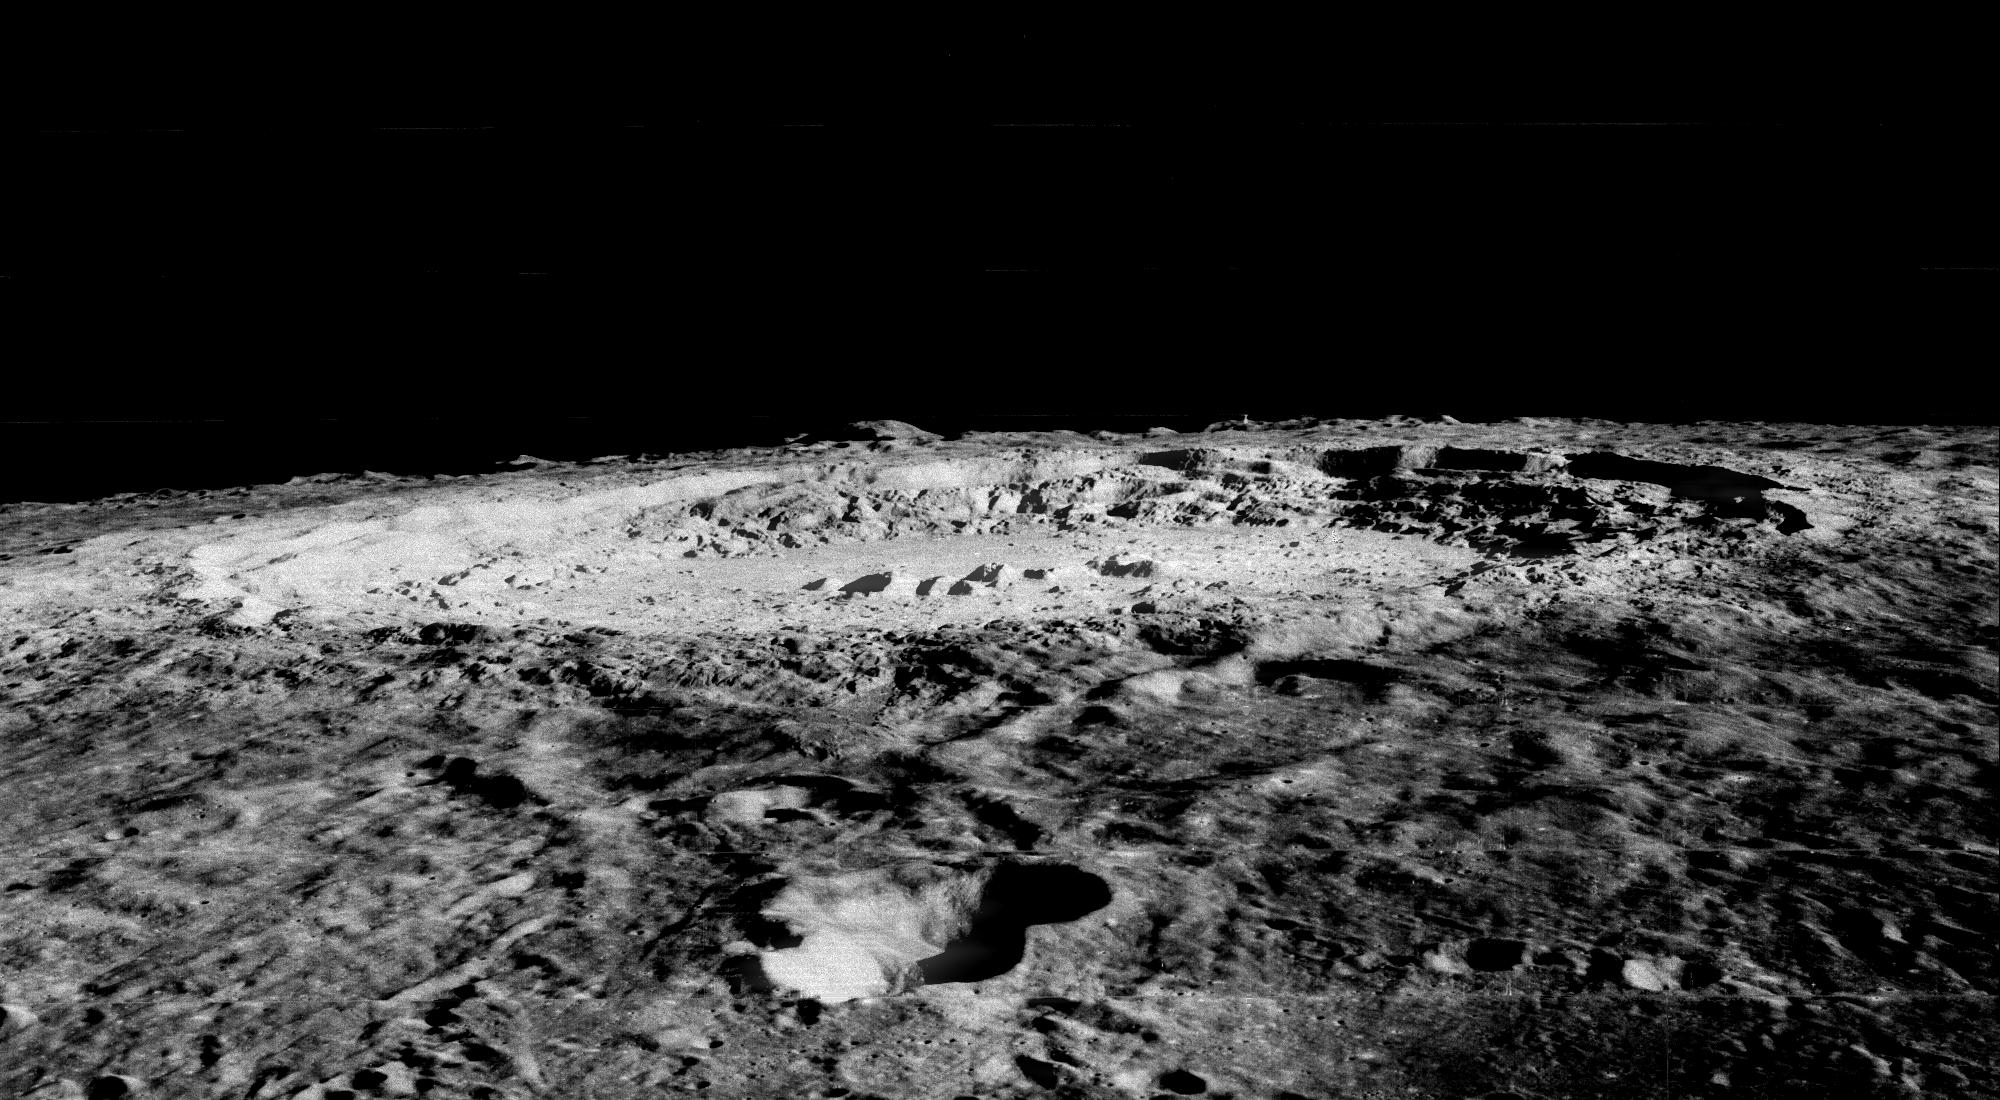 Copernicus is 93 km wide and is located within the Mare Imbrium Basin, northern nearside of the Moon (10 degrees N. 20 degrees W.).